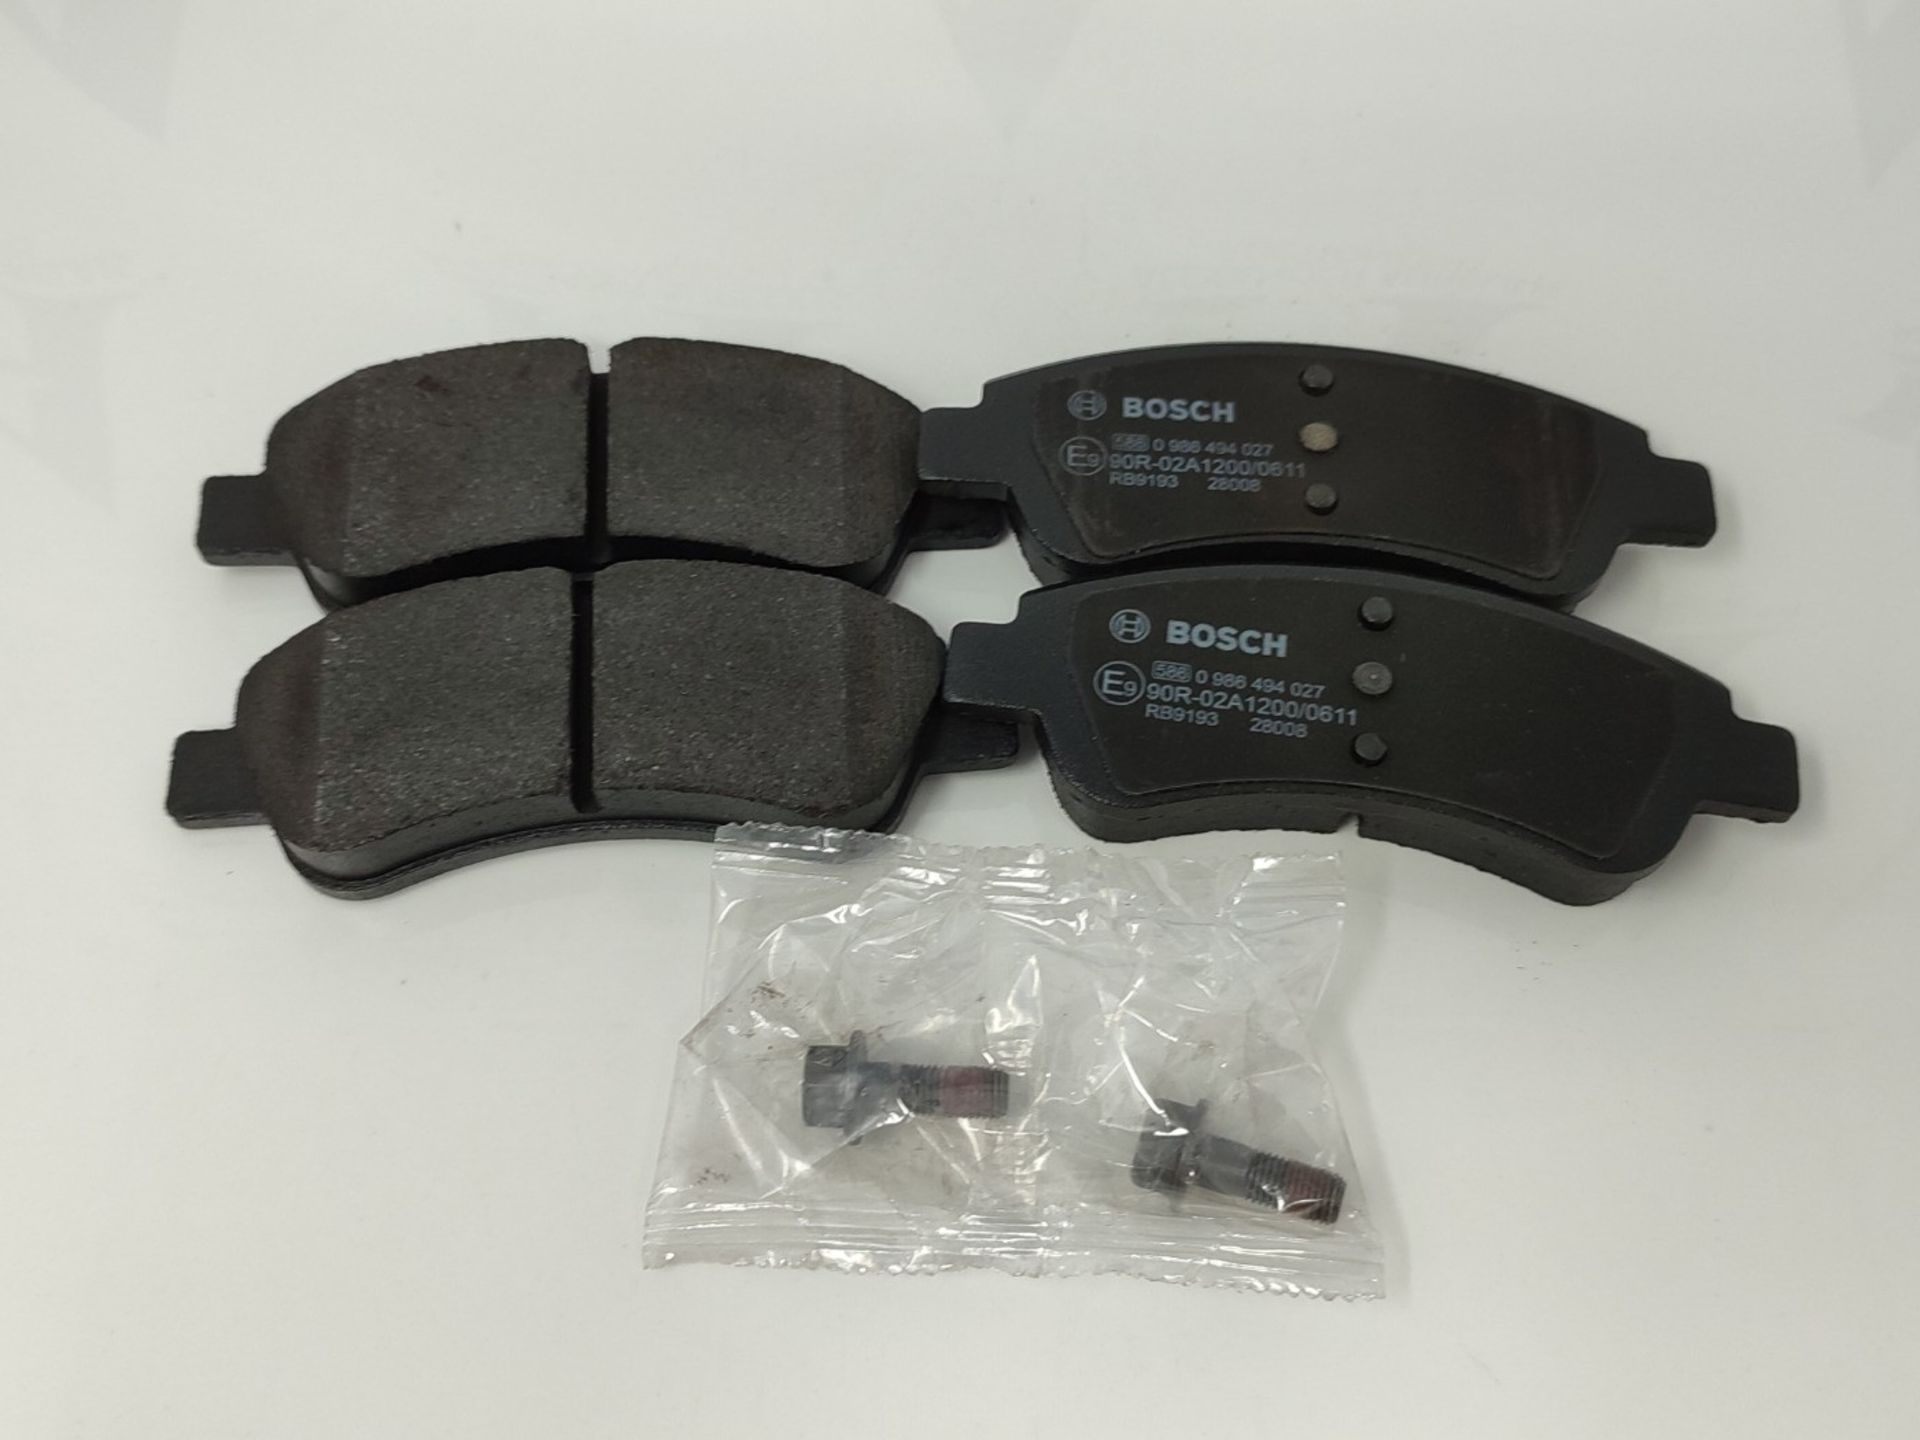 Bosch BP318 Brake Pads - Front Axle - ECE-R90 Certified - 1 Set of 4 Pads - Image 3 of 3